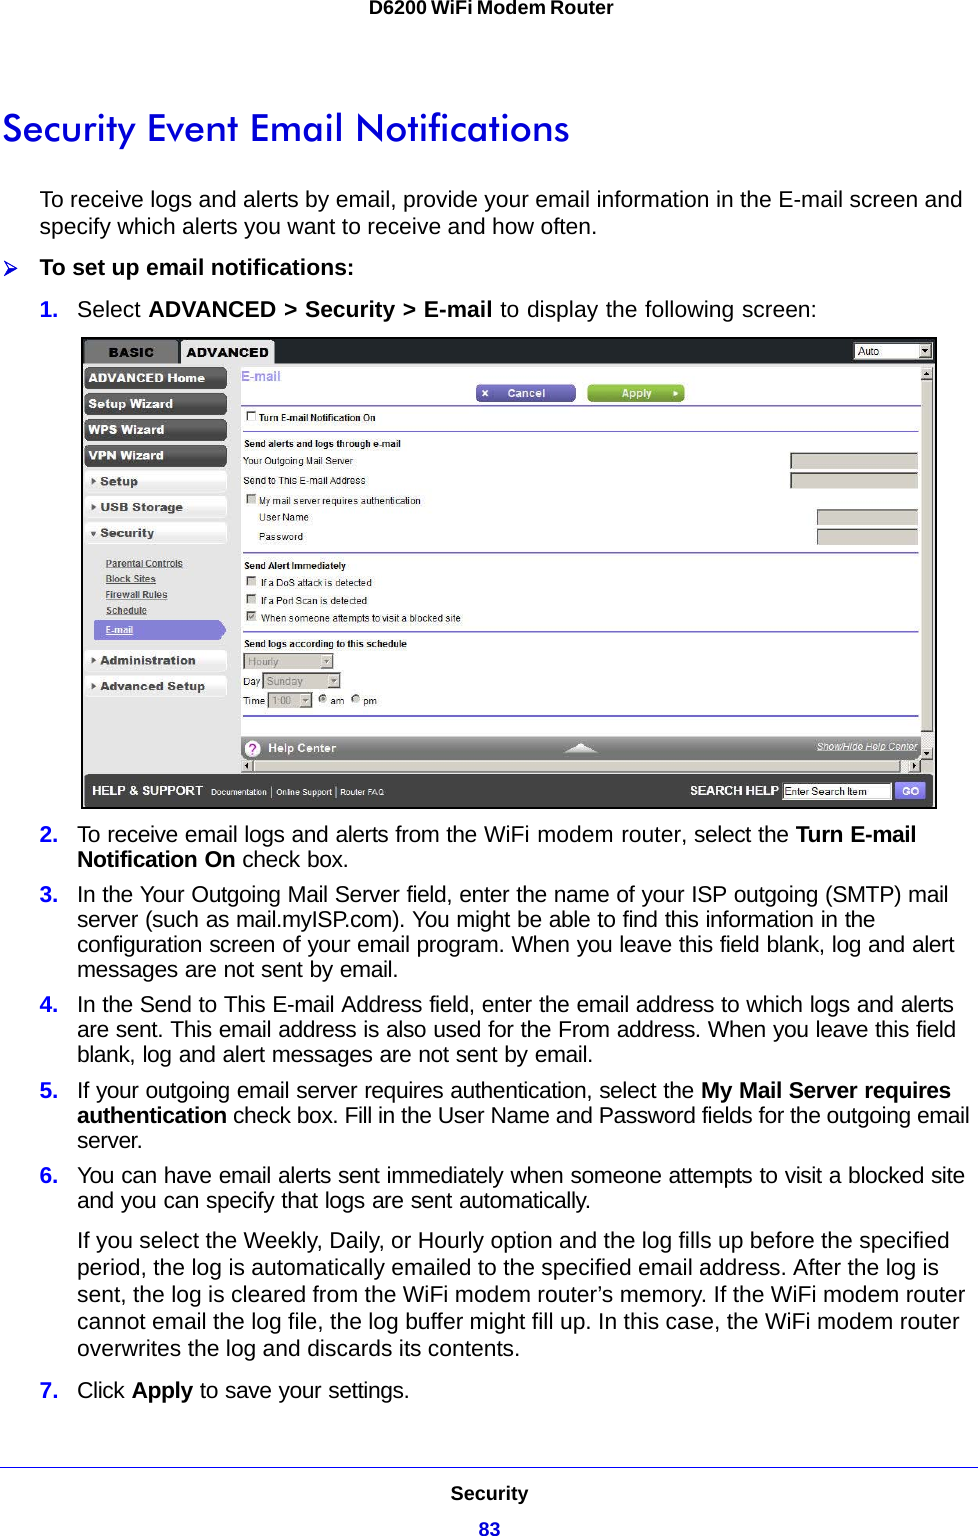 Security83 D6200 WiFi Modem RouterSecurity Event Email NotificationsTo receive logs and alerts by email, provide your email information in the E-mail screen and specify which alerts you want to receive and how often. To set up email notifications:1. Select ADVANCED &gt; Security &gt; E-mail to display the following screen:2. To receive email logs and alerts from the WiFi modem router, select the Turn E-mail Notification On check box.3. In the Your Outgoing Mail Server field, enter the name of your ISP outgoing (SMTP) mail server (such as mail.myISP.com). You might be able to find this information in the configuration screen of your email program. When you leave this field blank, log and alert messages are not sent by email.4. In the Send to This E-mail Address field, enter the email address to which logs and alerts are sent. This email address is also used for the From address. When you leave this field blank, log and alert messages are not sent by email.5. If your outgoing email server requires authentication, select the My Mail Server requires authentication check box. Fill in the User Name and Password fields for the outgoing email server.6. You can have email alerts sent immediately when someone attempts to visit a blocked site and you can specify that logs are sent automatically.If you select the Weekly, Daily, or Hourly option and the log fills up before the specified period, the log is automatically emailed to the specified email address. After the log is sent, the log is cleared from the WiFi modem router’s memory. If the WiFi modem router cannot email the log file, the log buffer might fill up. In this case, the WiFi modem router overwrites the log and discards its contents.7. Click Apply to save your settings.